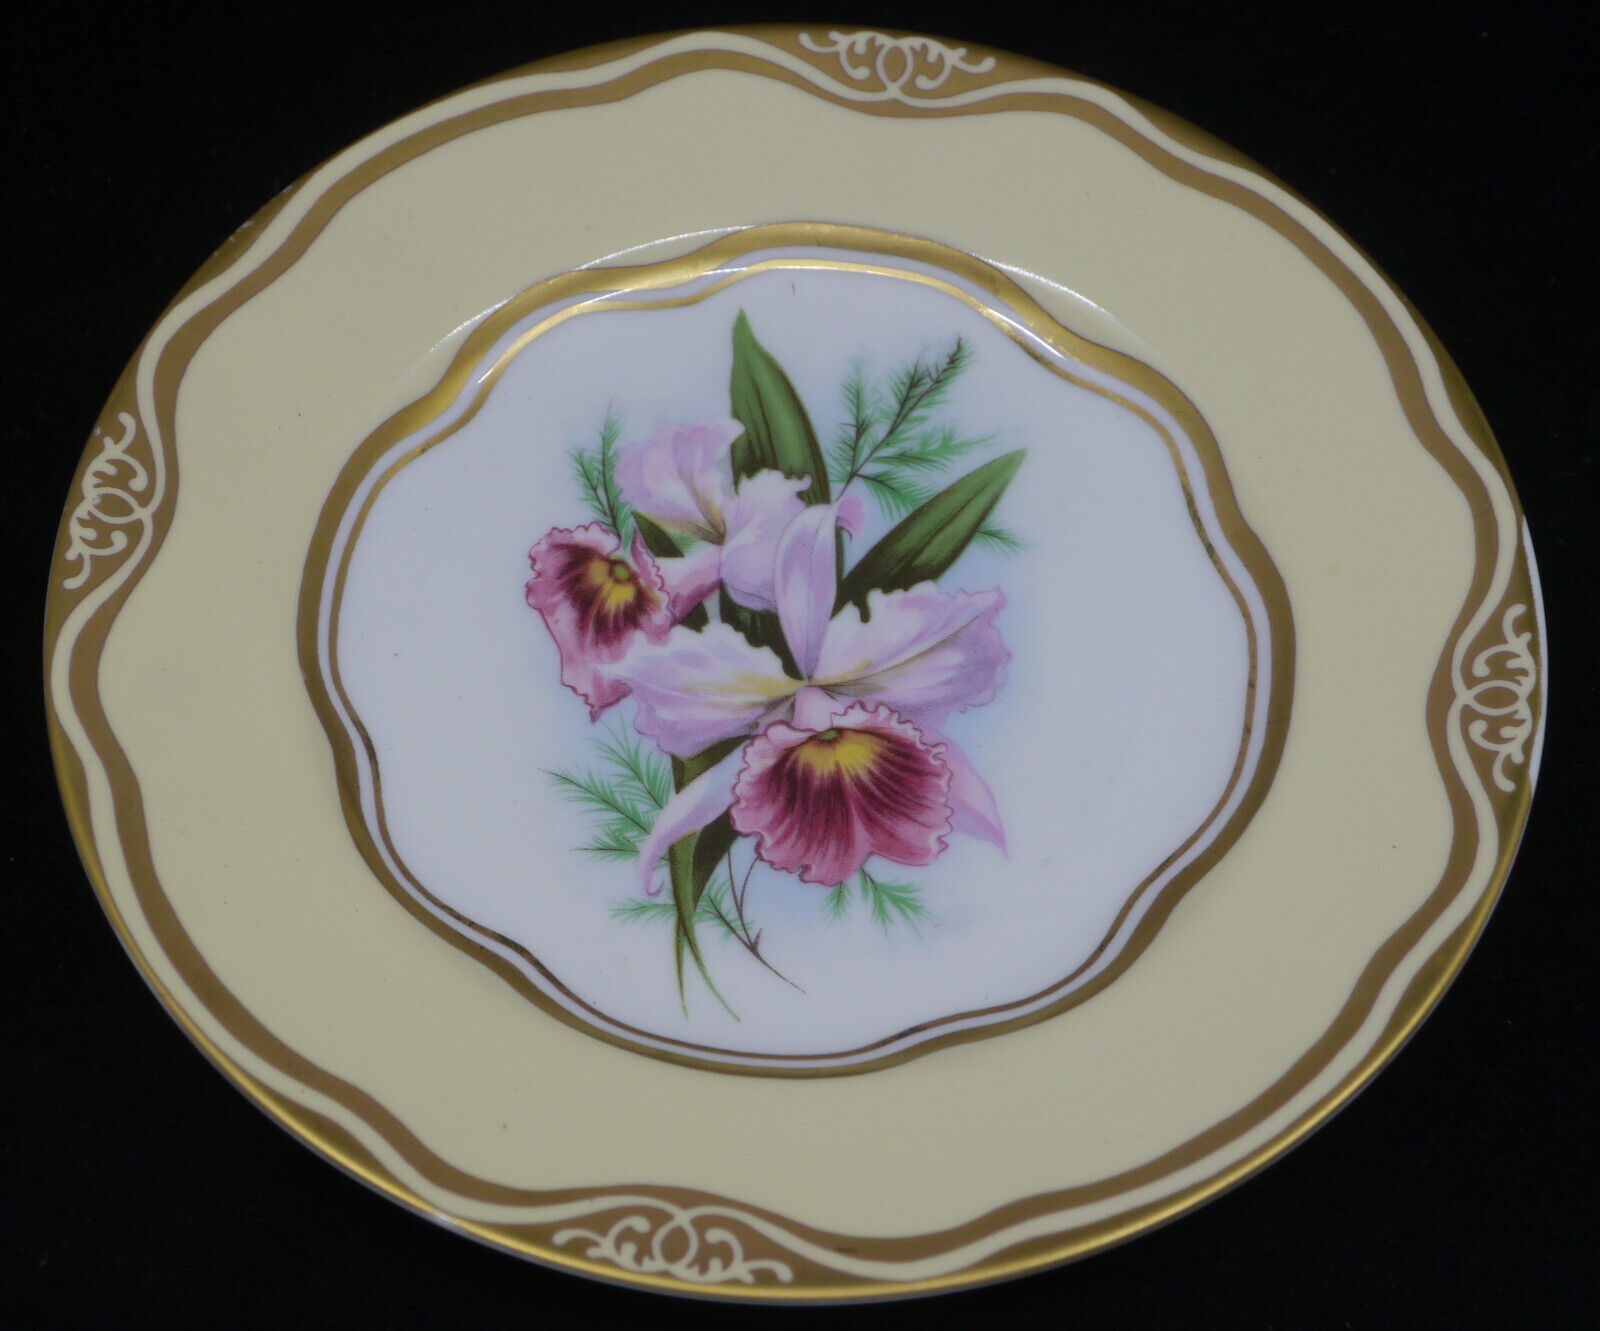 FLOWERS OF THE FIRST LADIES COLLECTOR PLATE, CAROLINE HARRISON, ORCHID, WOODMERE